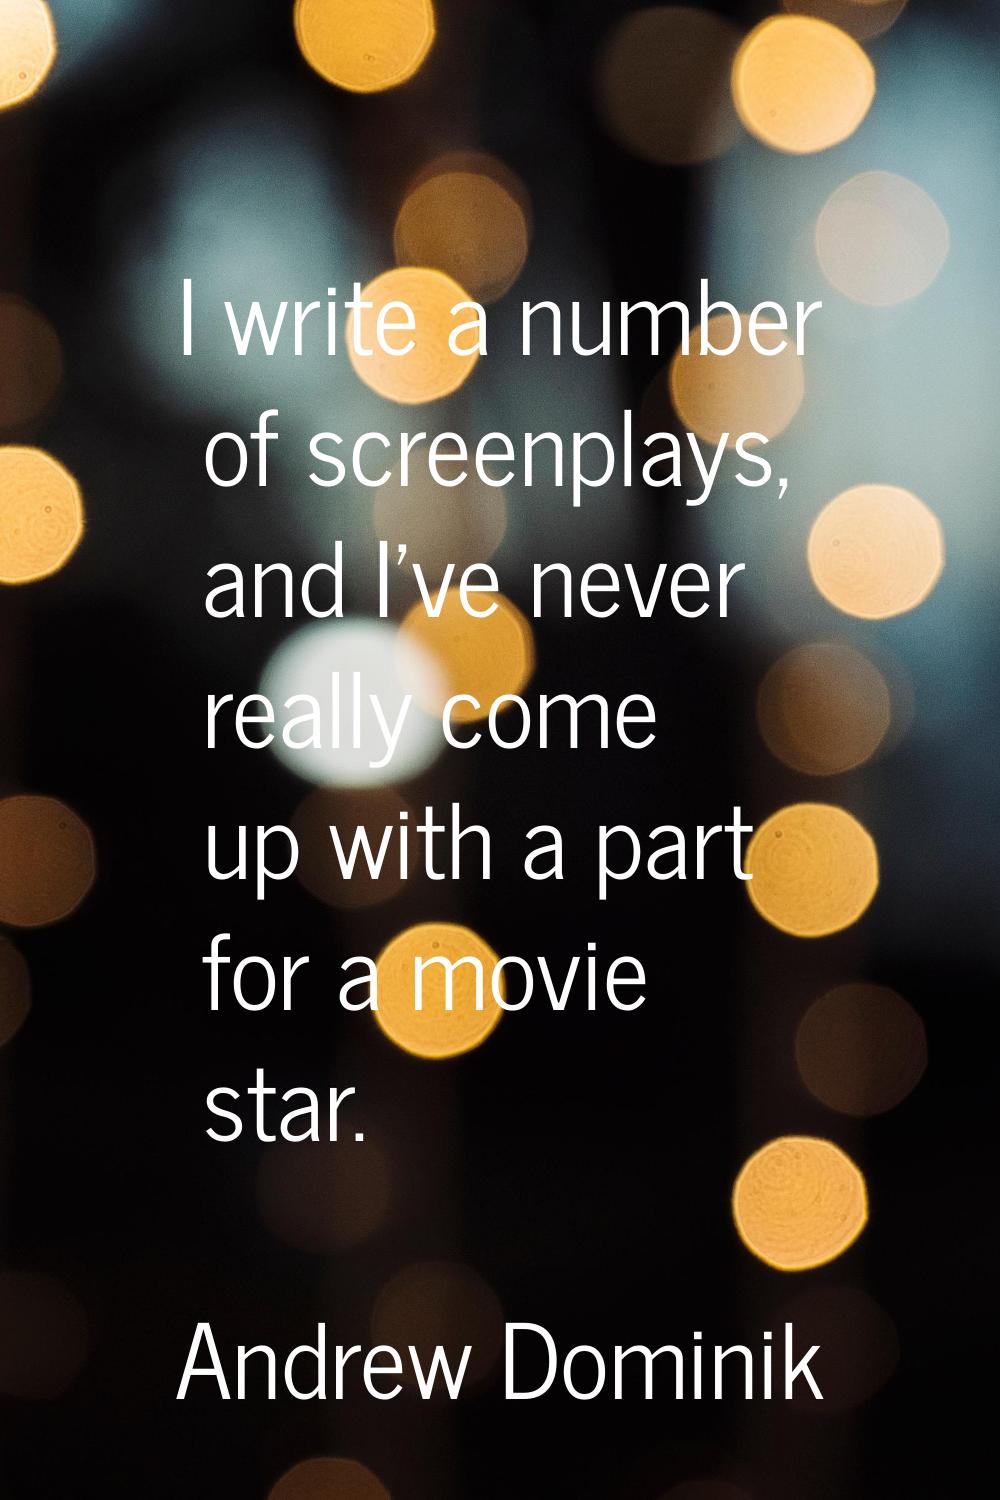 I write a number of screenplays, and I've never really come up with a part for a movie star.